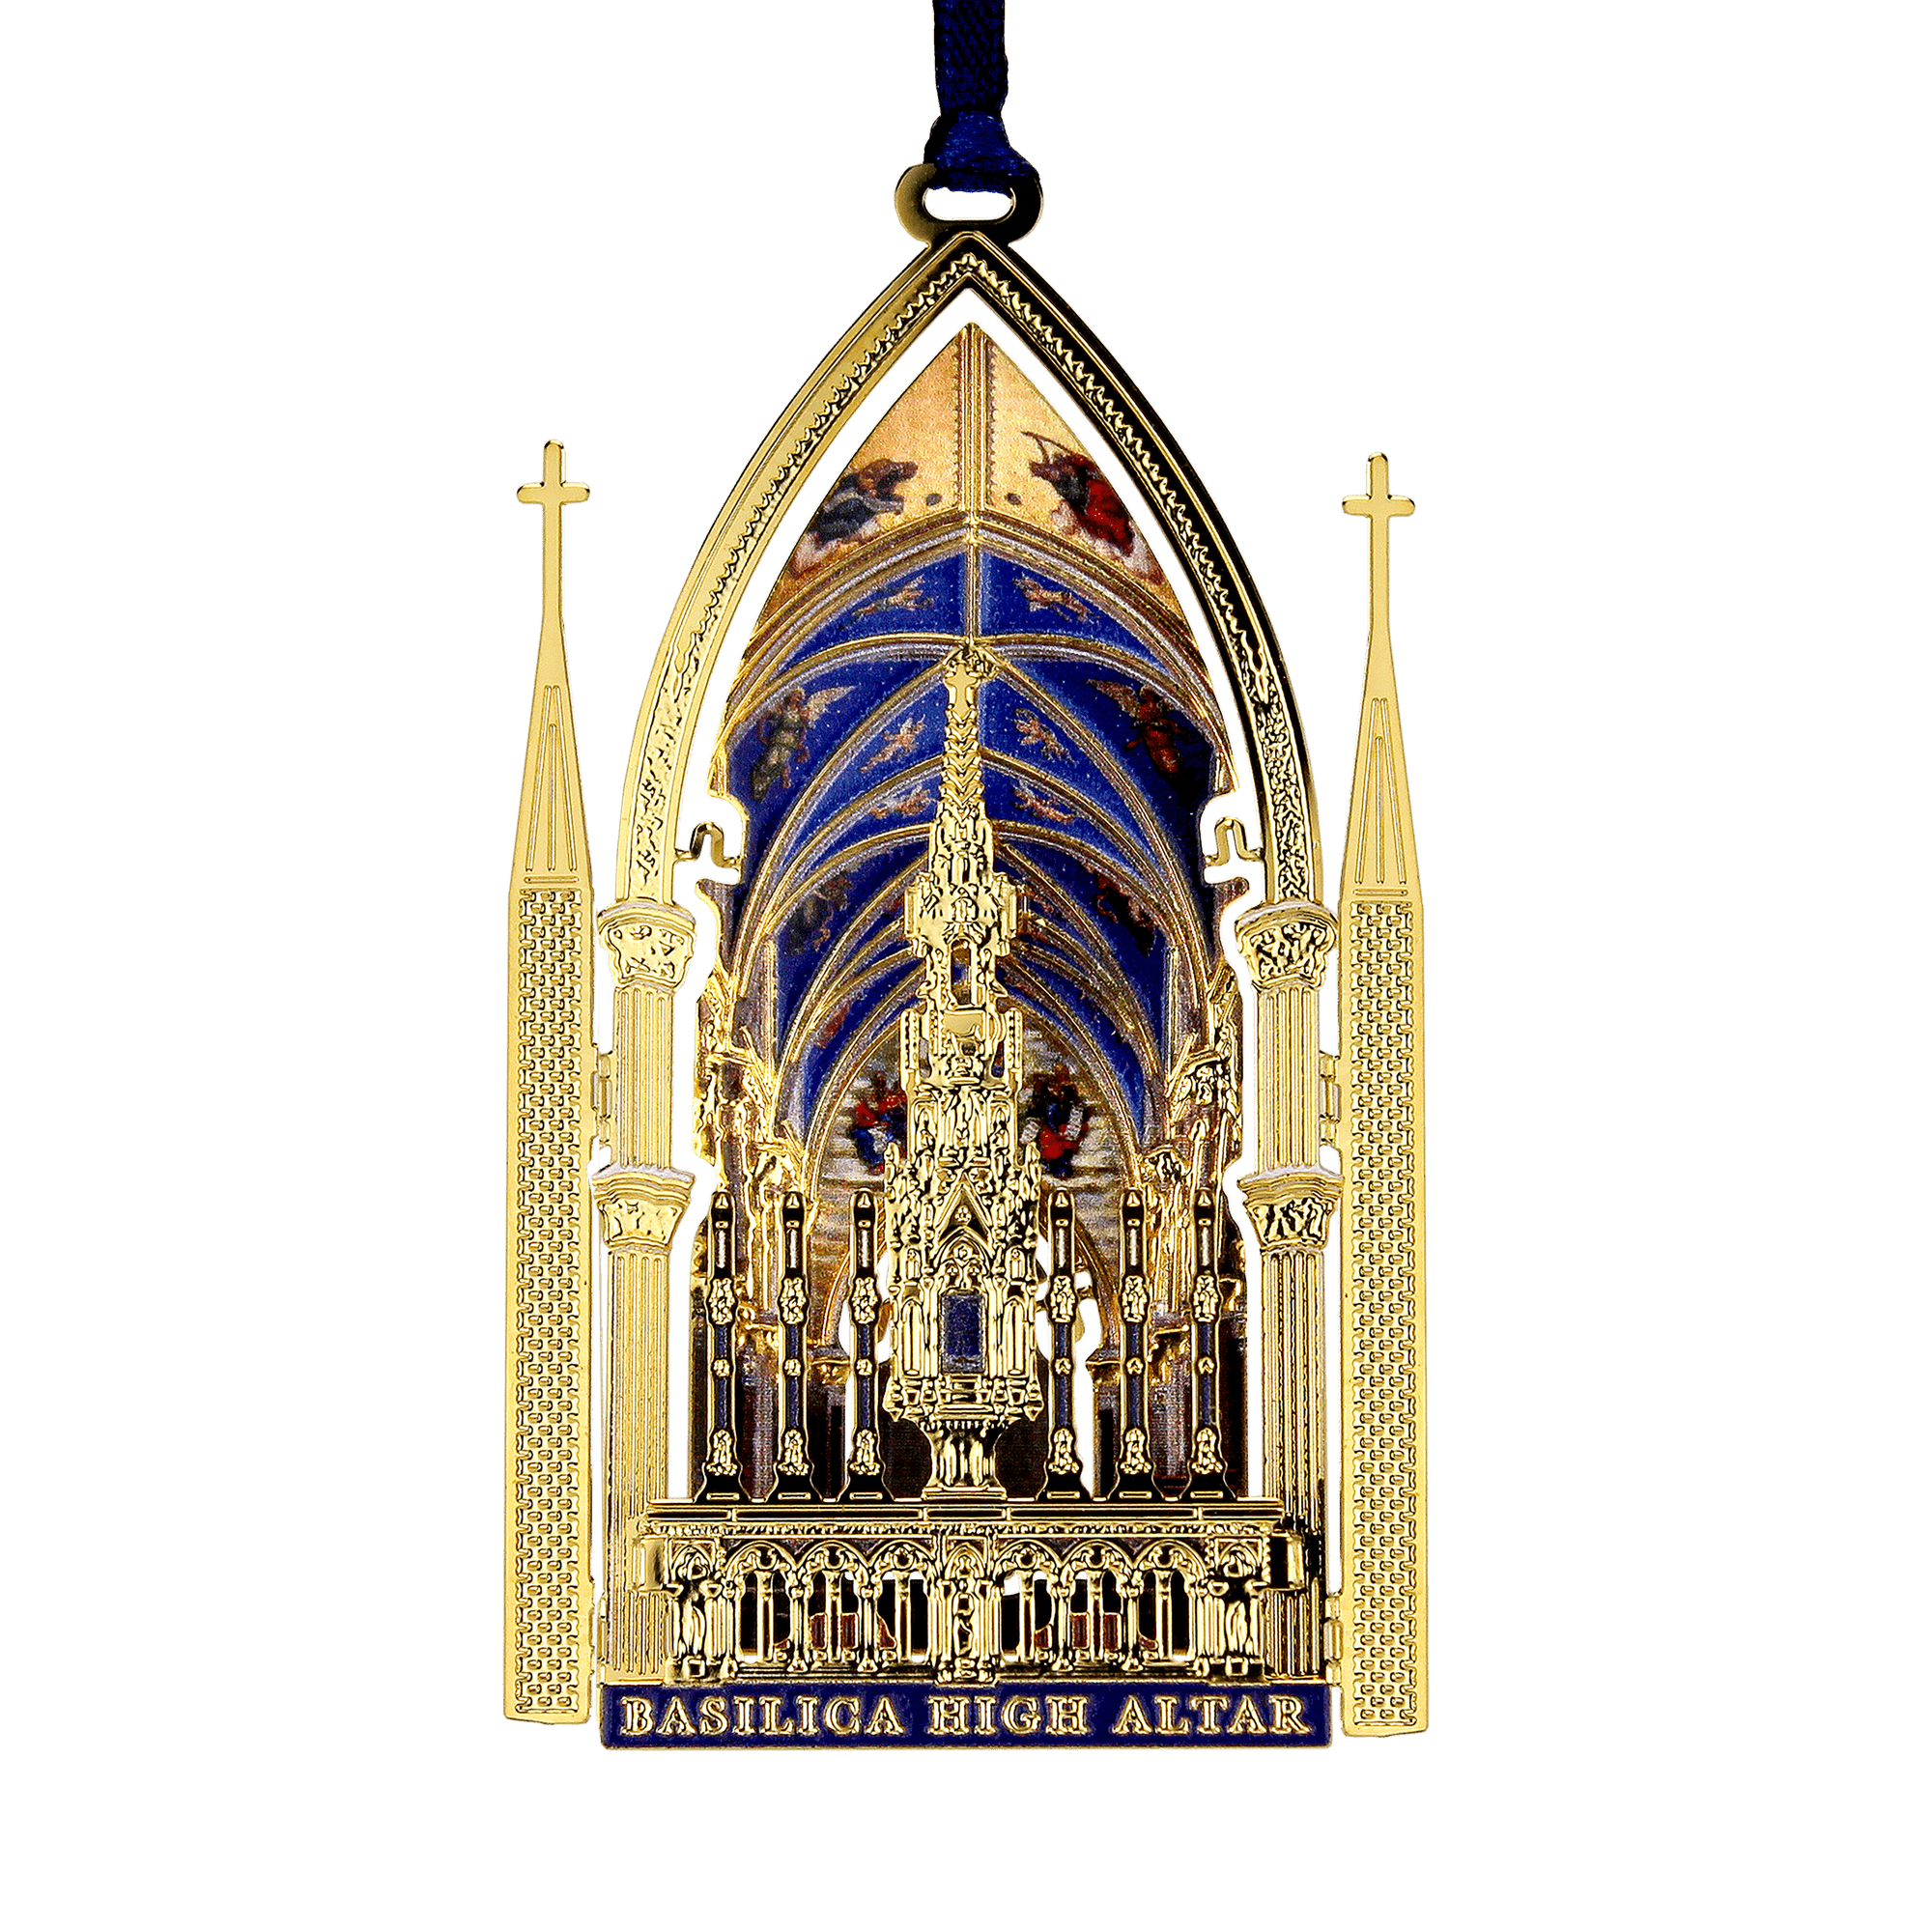 Multi-Level ornament finished in 24K gold with color